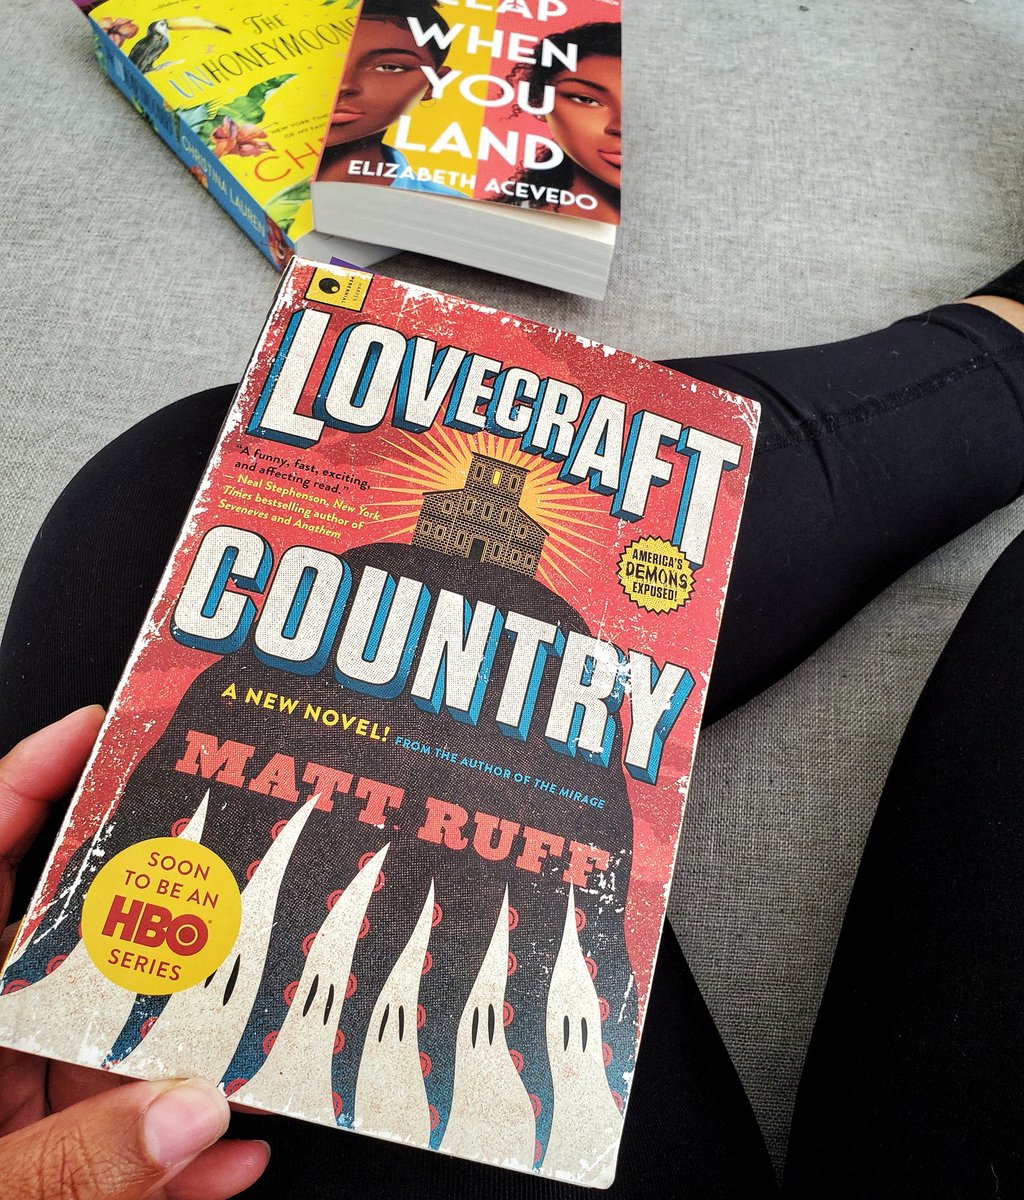  I'm enjoying reading Lovecraft Country so much that it makes me want to read more horror featuring Black protagonists. I've only read this genre a few times before, can count on one hand the number of times, and they've always been written by Victor LaValle or Tananarive Due.